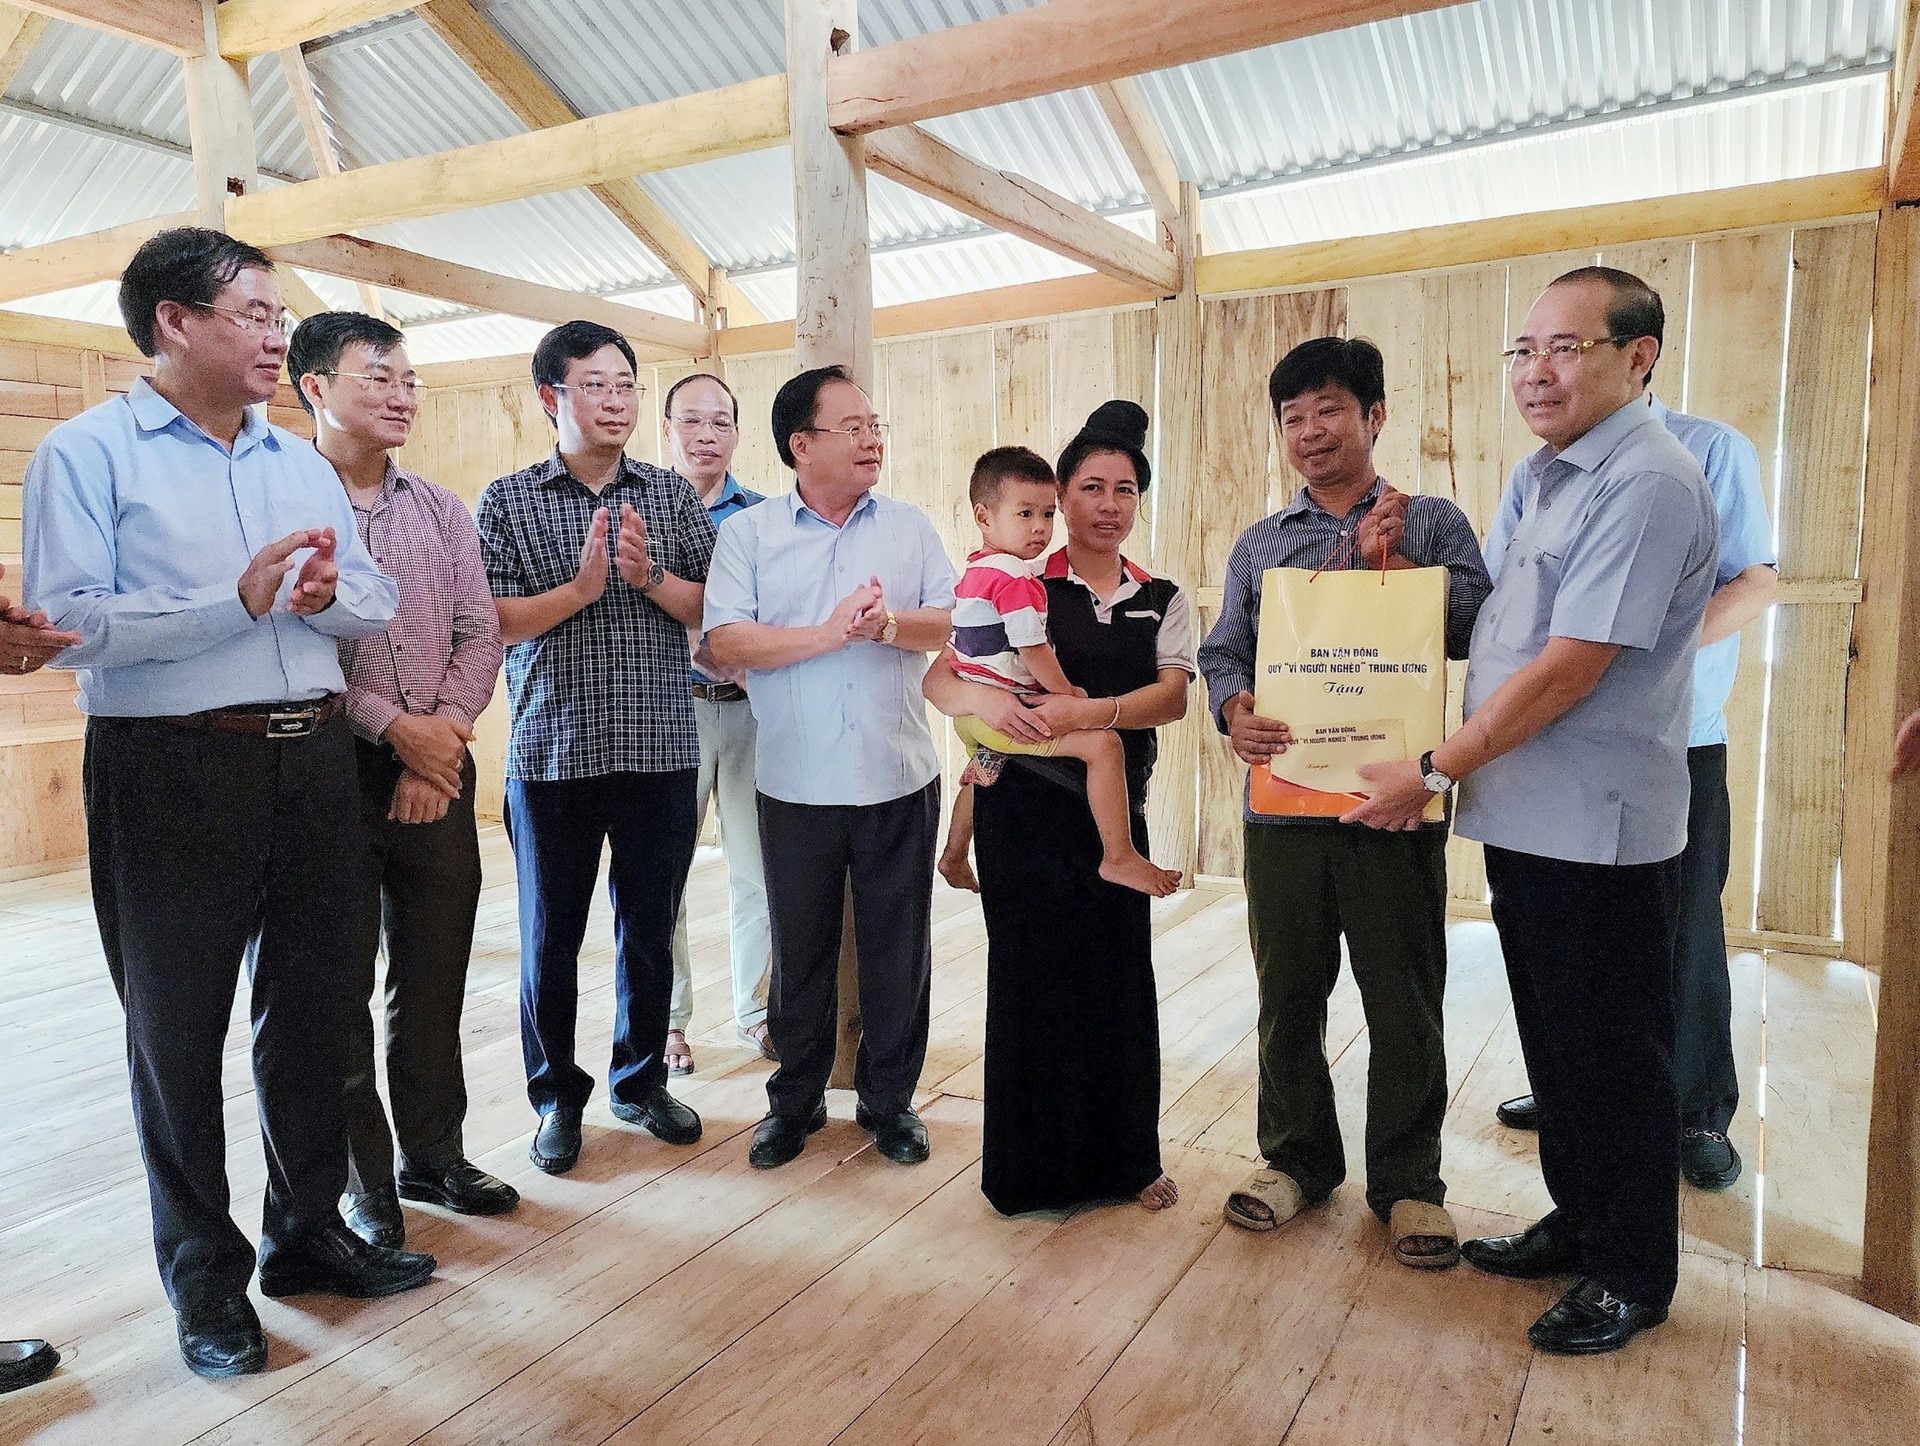 Vice Chairman of the Central Committee of the Vietnam Fatherland Front Hoang Cong Thuy visited and gave gifts to Mr. Lo Van Long's family in their new house in Na Sang commune, Muong Cha district. Photo: Ngo Hung.